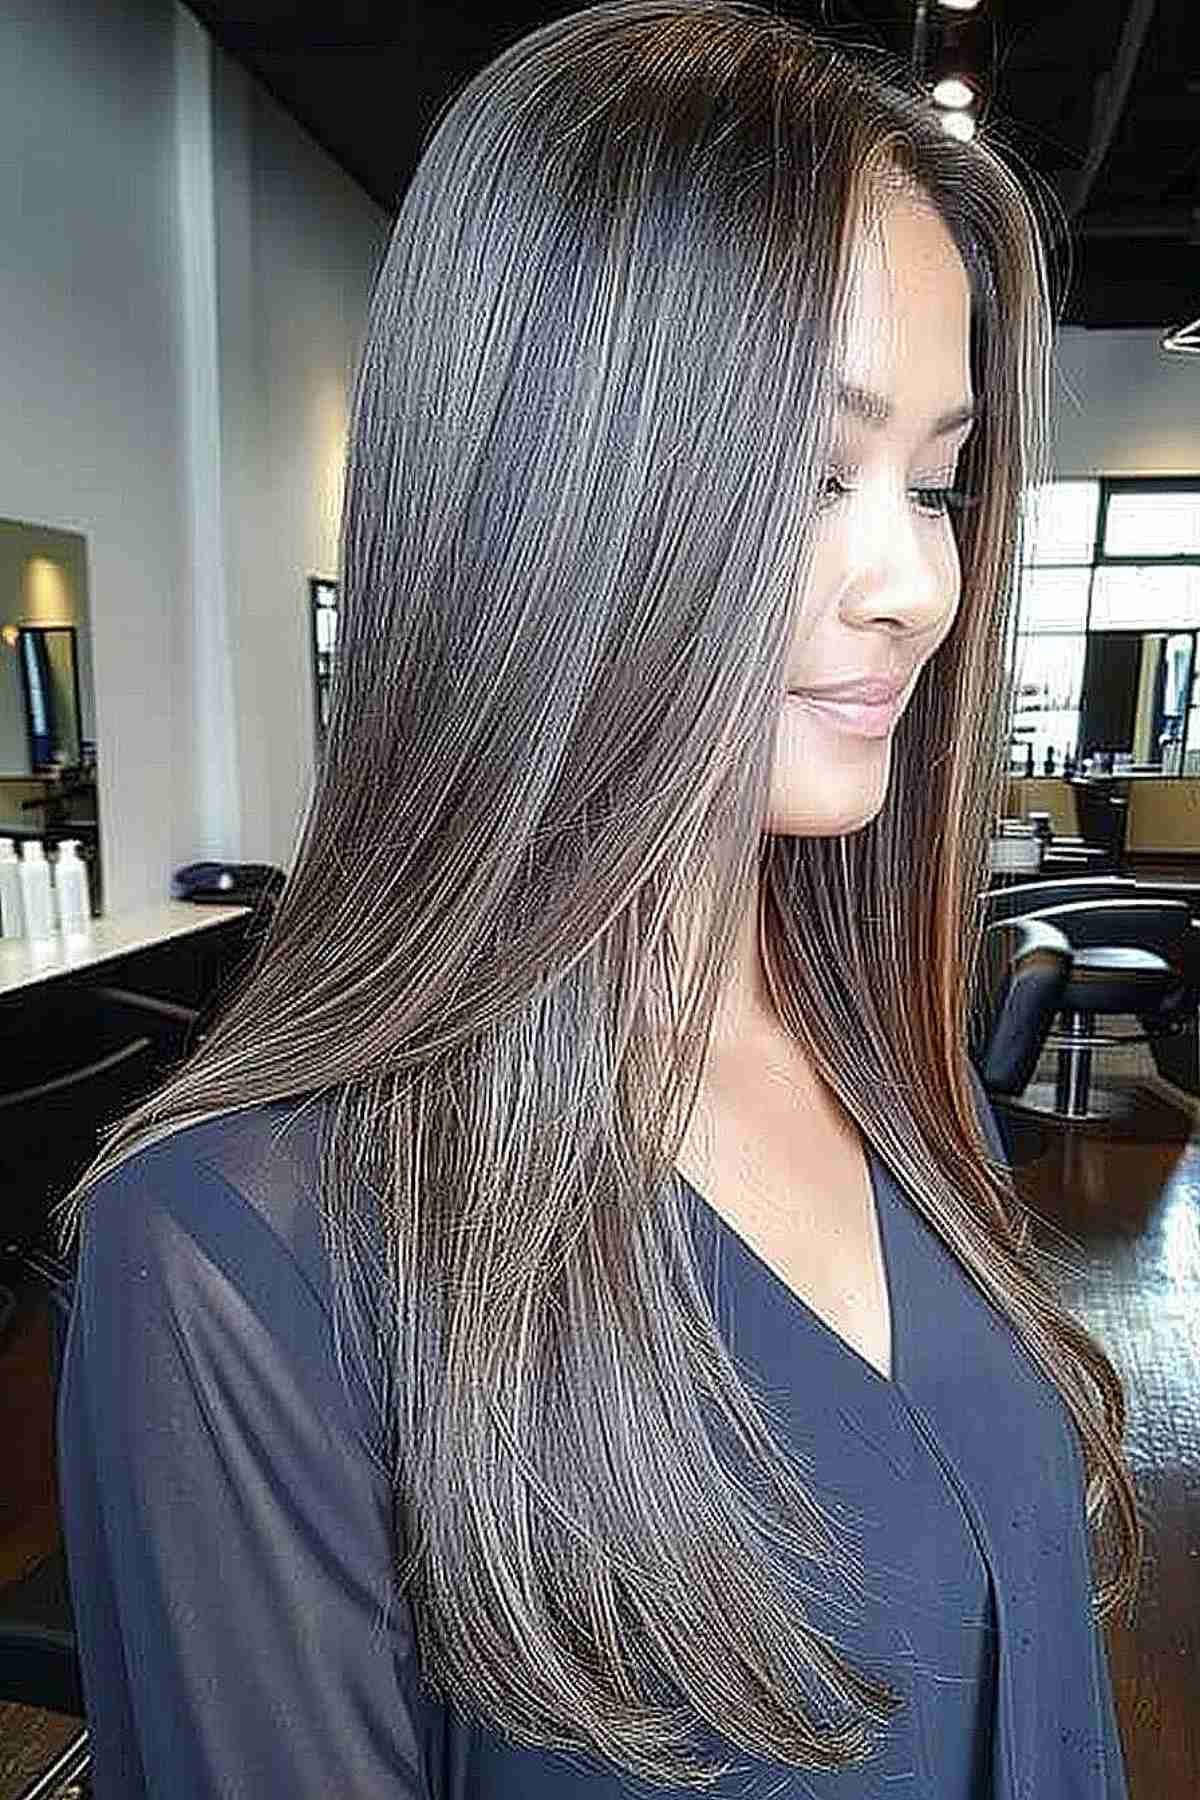 Long straight hair with metallic silver and ash brown tones for a youthful, modern look